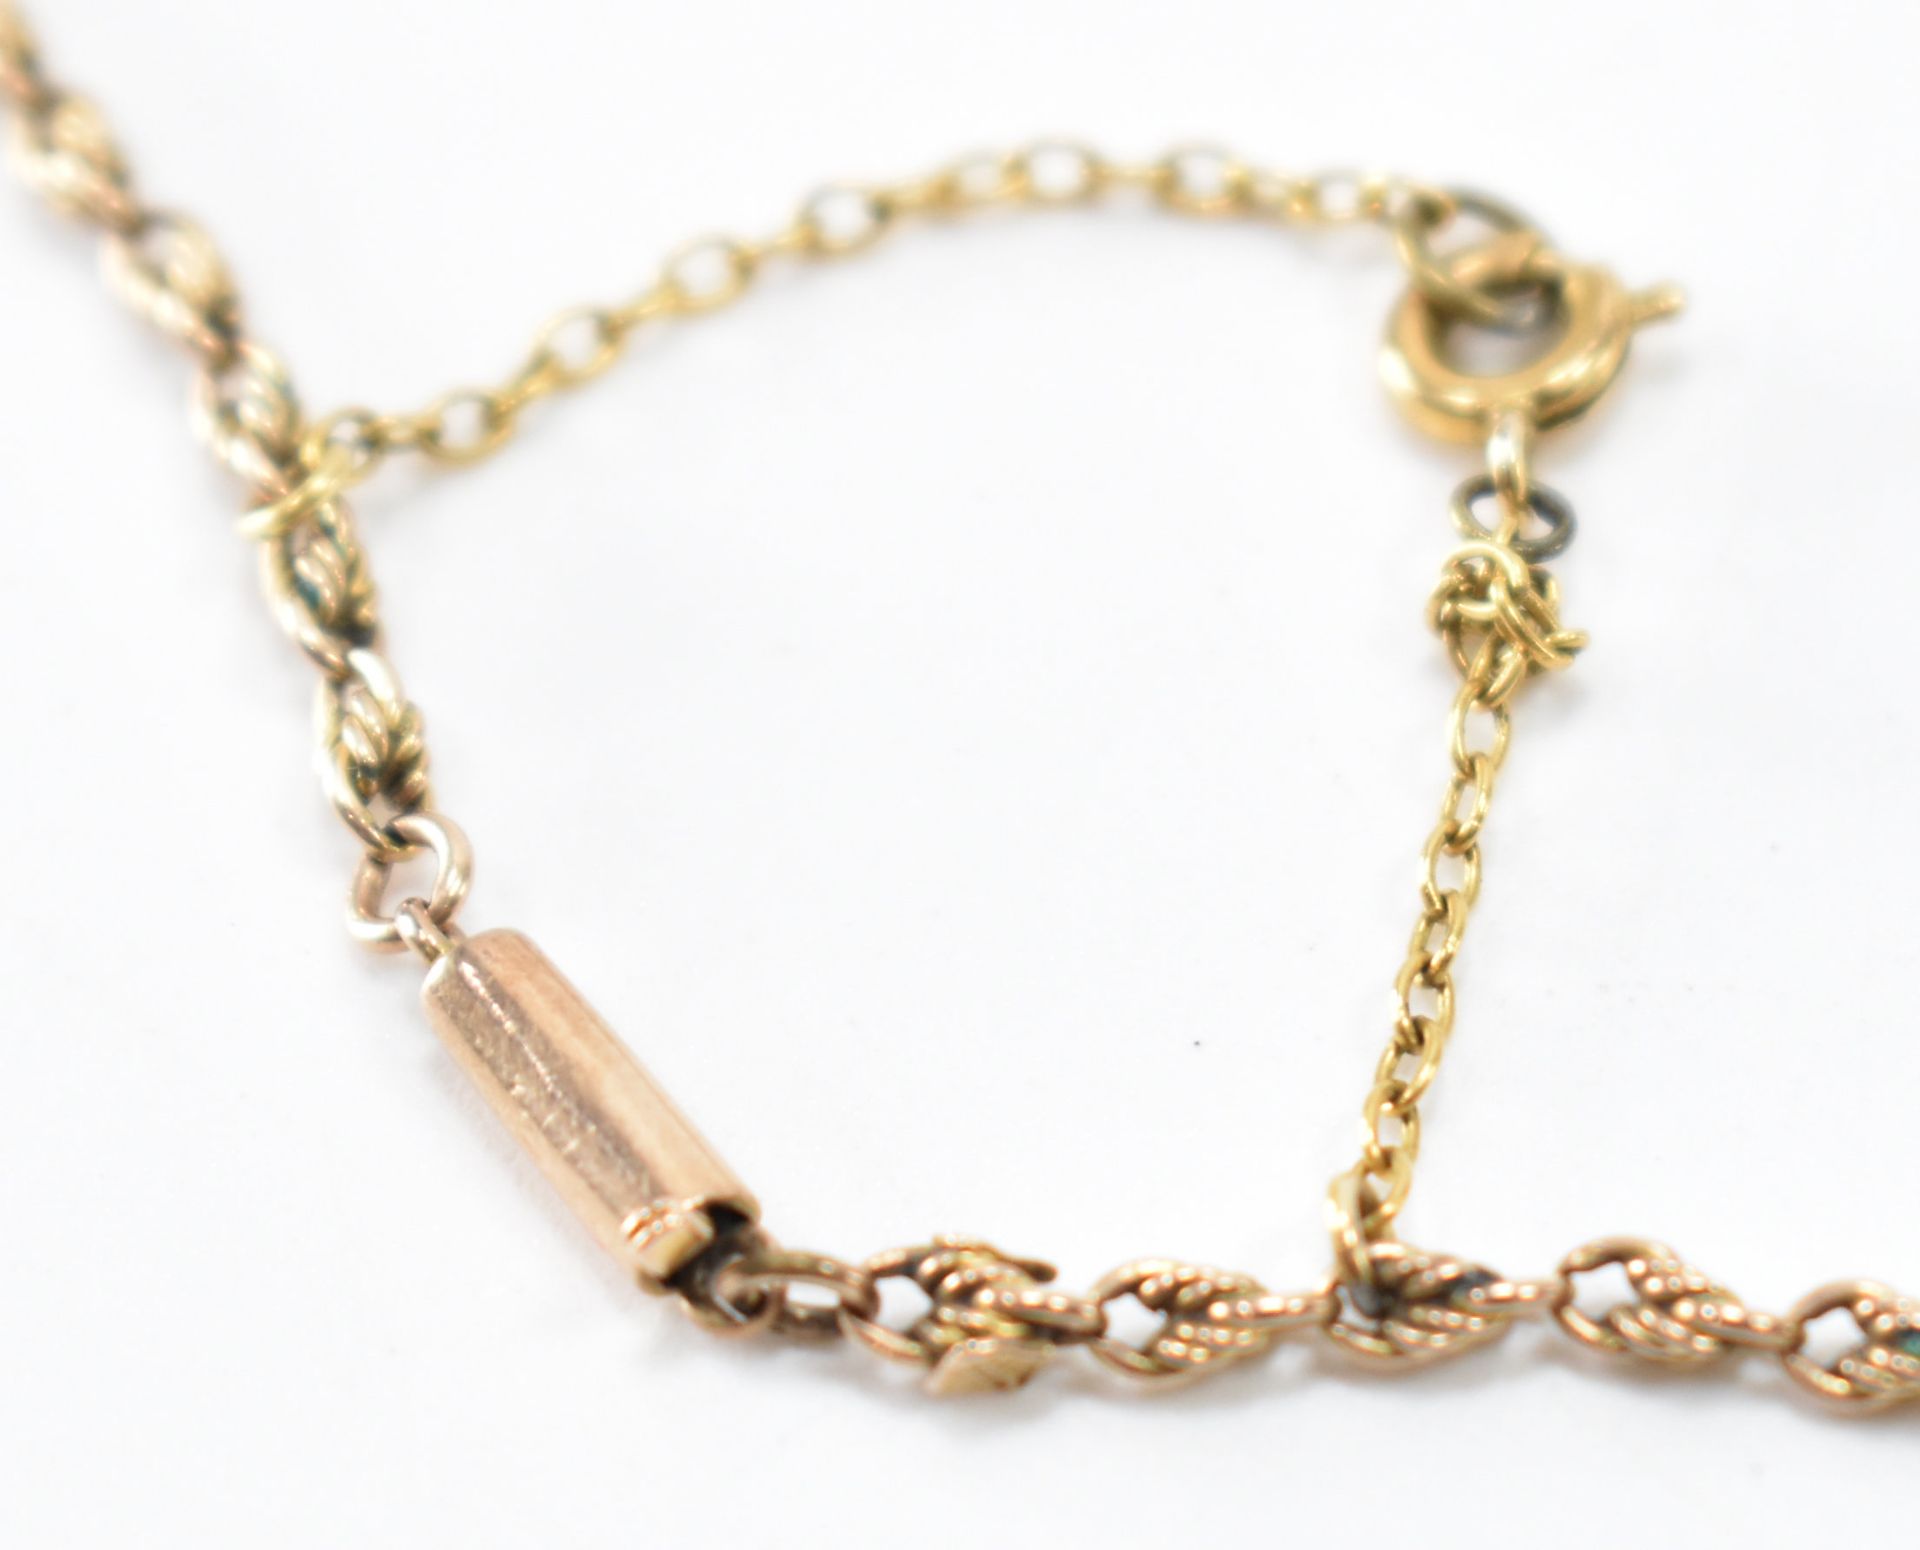 VINTAGE 9CT GOLD FANCY LINK NECKLACE CHAIN - Image 3 of 4